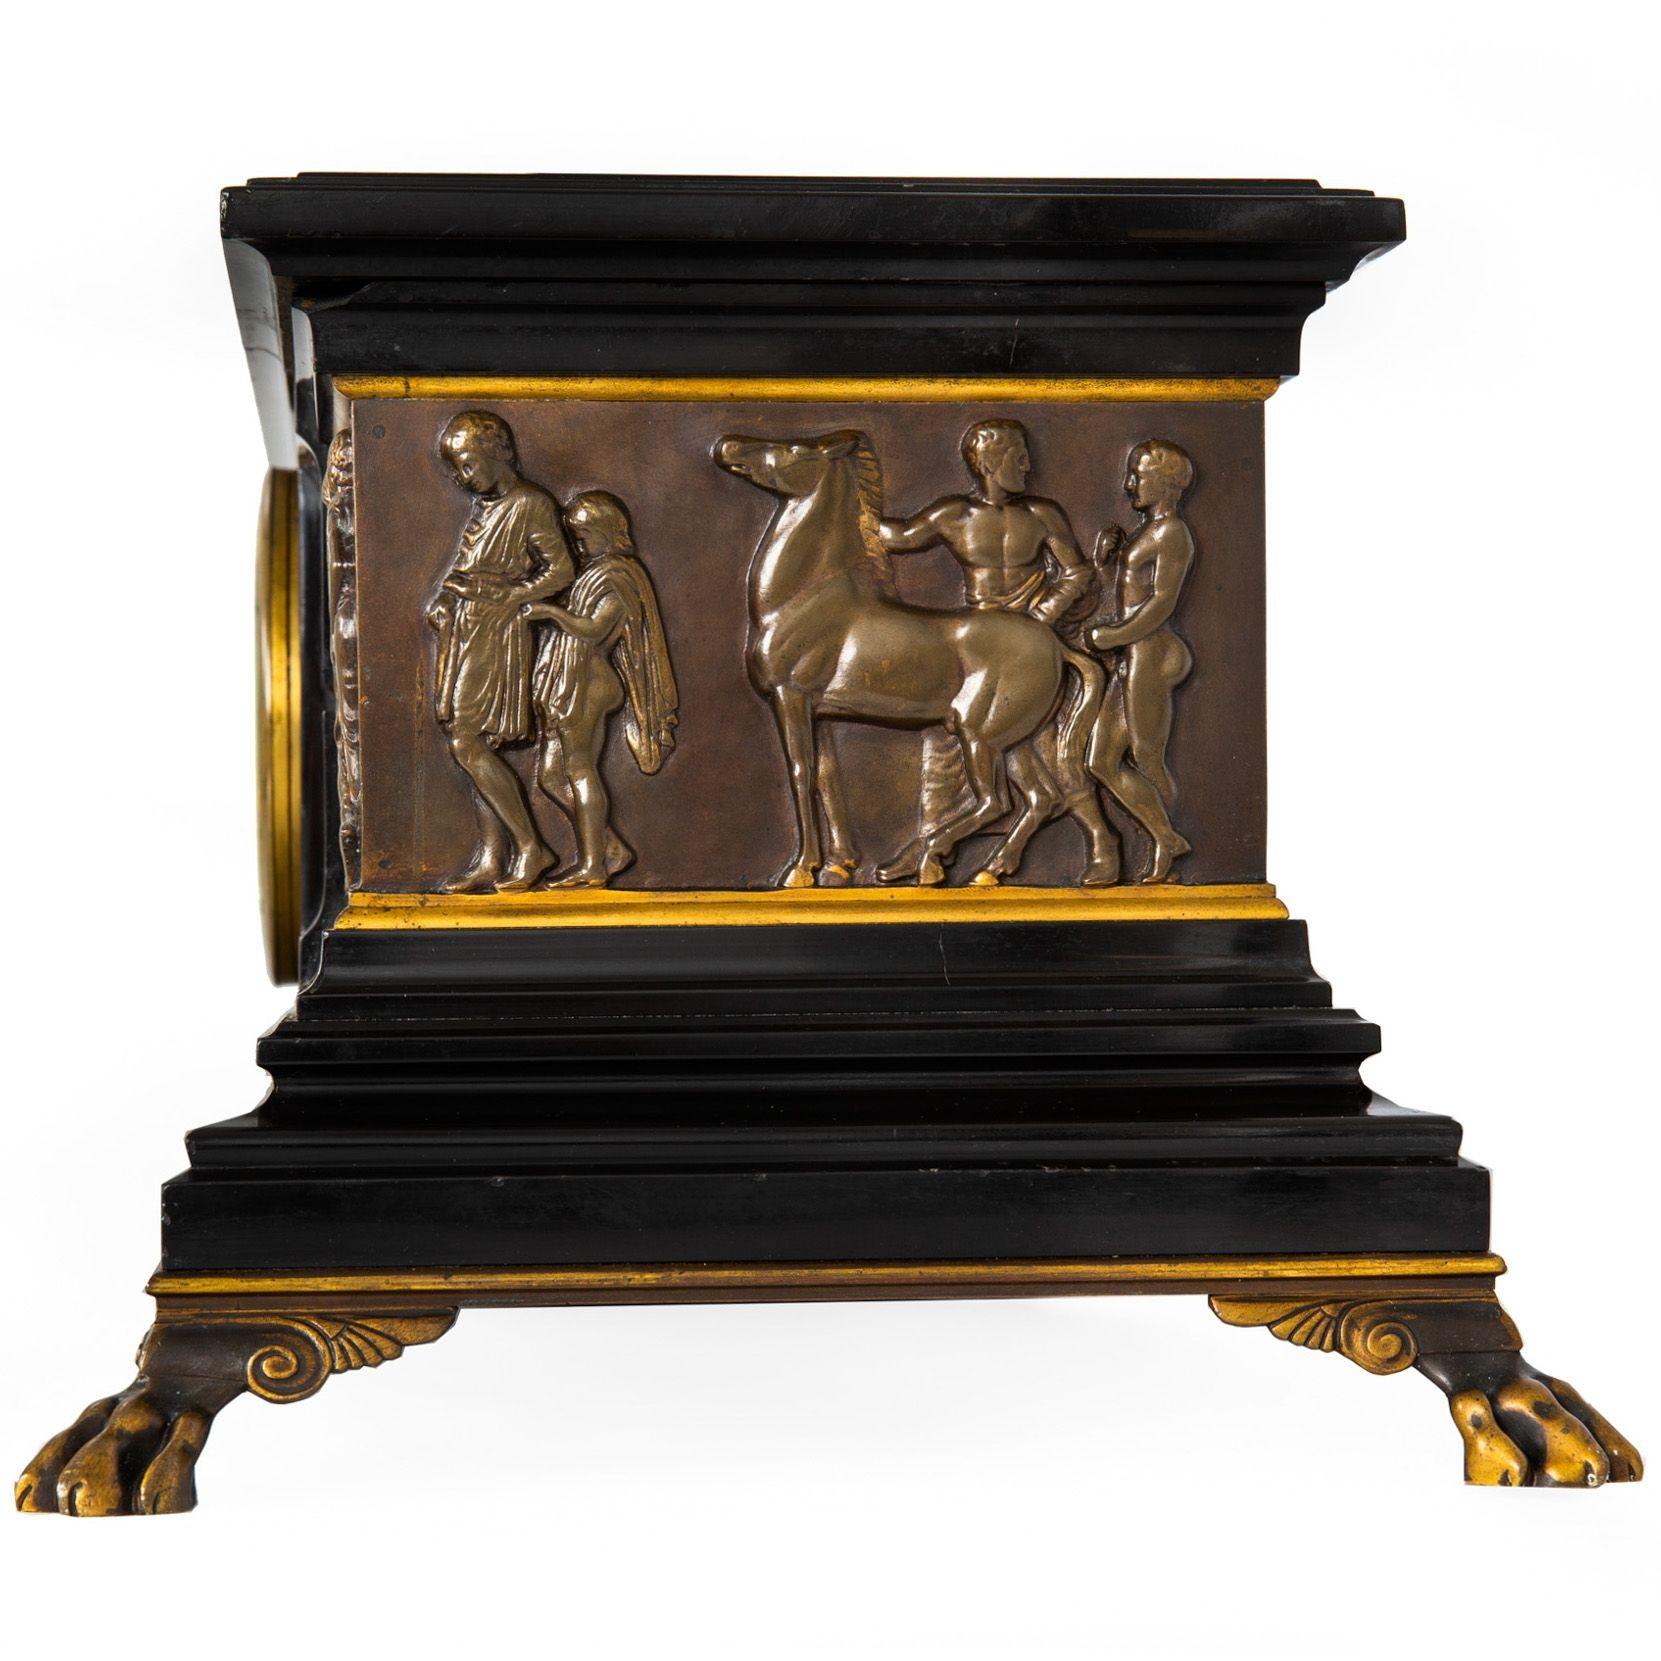 FRENCH NEO-GREC BLACK MARBLE AND PATINATED BRONZE MANTEL CLOCK
Edited by F. Barbedienne Fondeurs, Paris (faded engraving on dial), movement by Charles Boye circa 1880-1900
Item # 303PPQ23M 

A very nice mantel clock in the Neo-Grec taste cast and